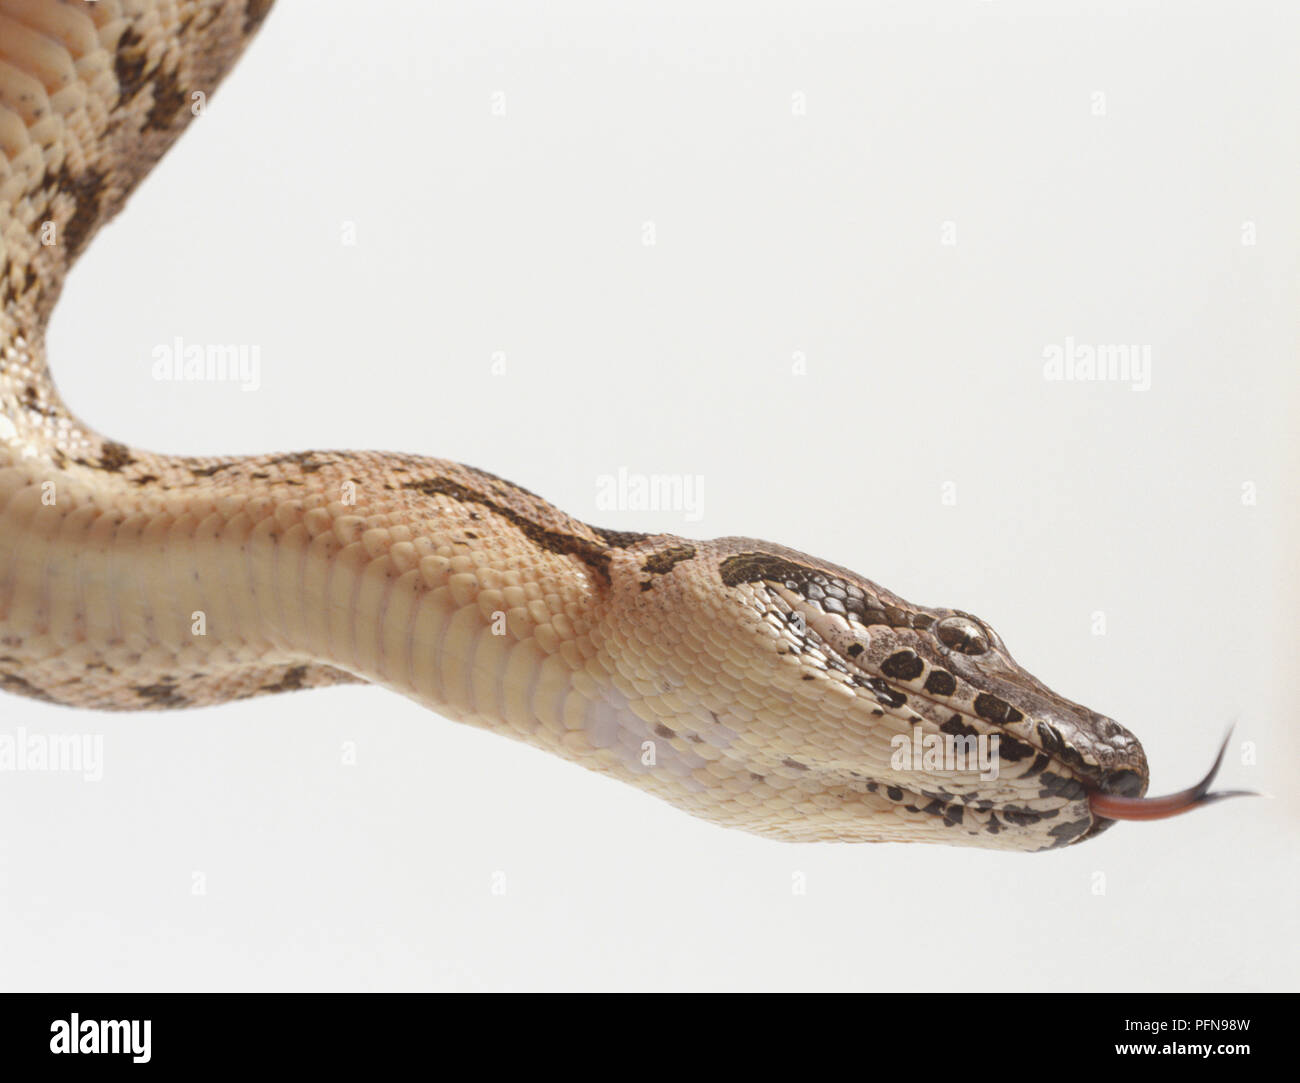 Side view of the head of a Dumeril's Boa, Boa dumerili, showing the conspicuous skin groove under the chin, known as the mental groove. It marks a particularly elastic area of skin. An eye and the forked tongue are also visible. Stock Photo